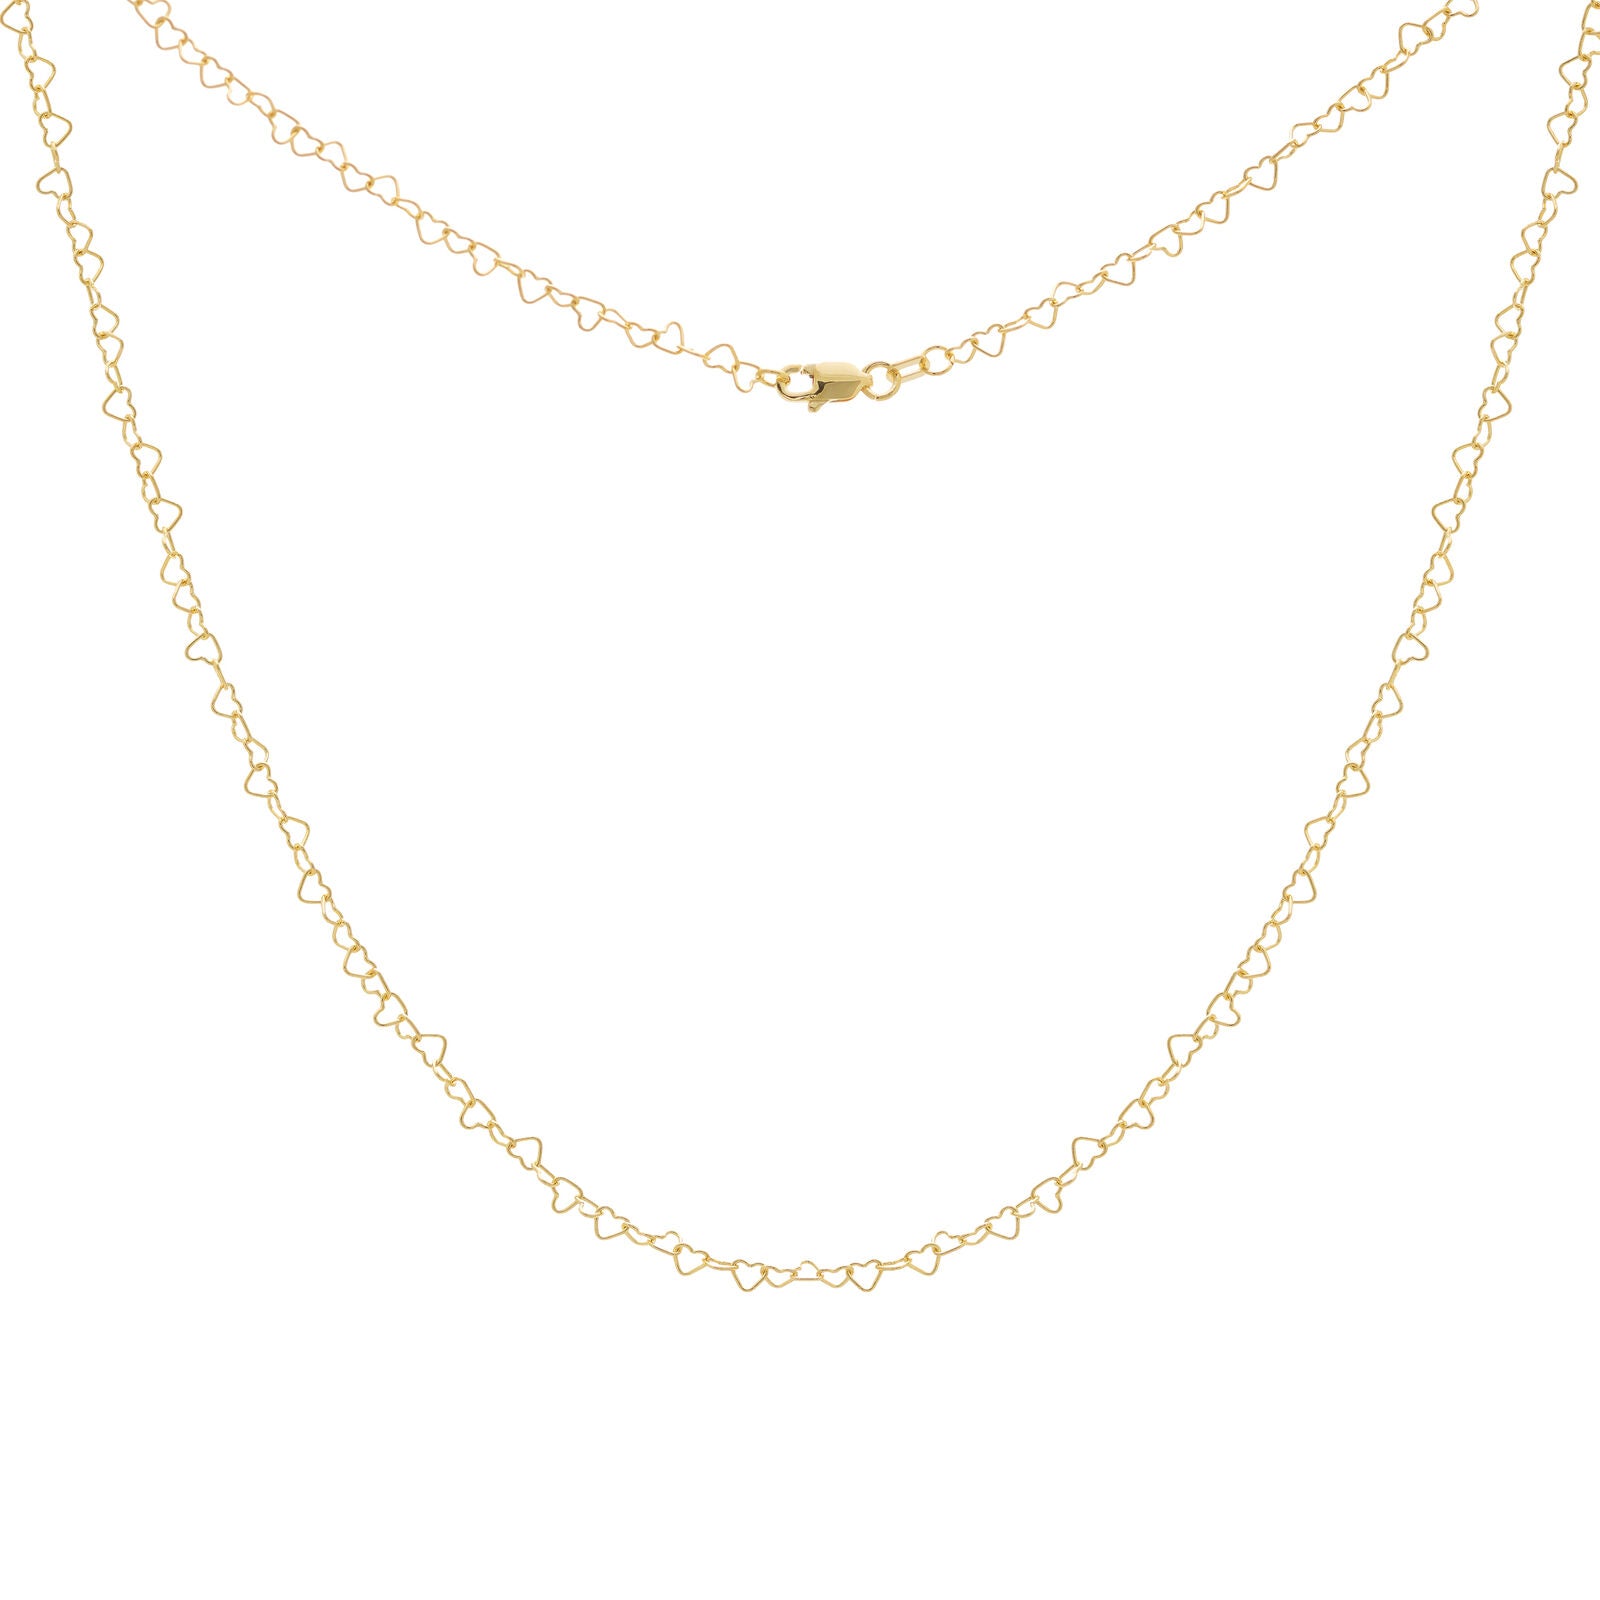 14K Solid Yellow Gold Love Heart Chain 2.5 mml Necklace 18" inches